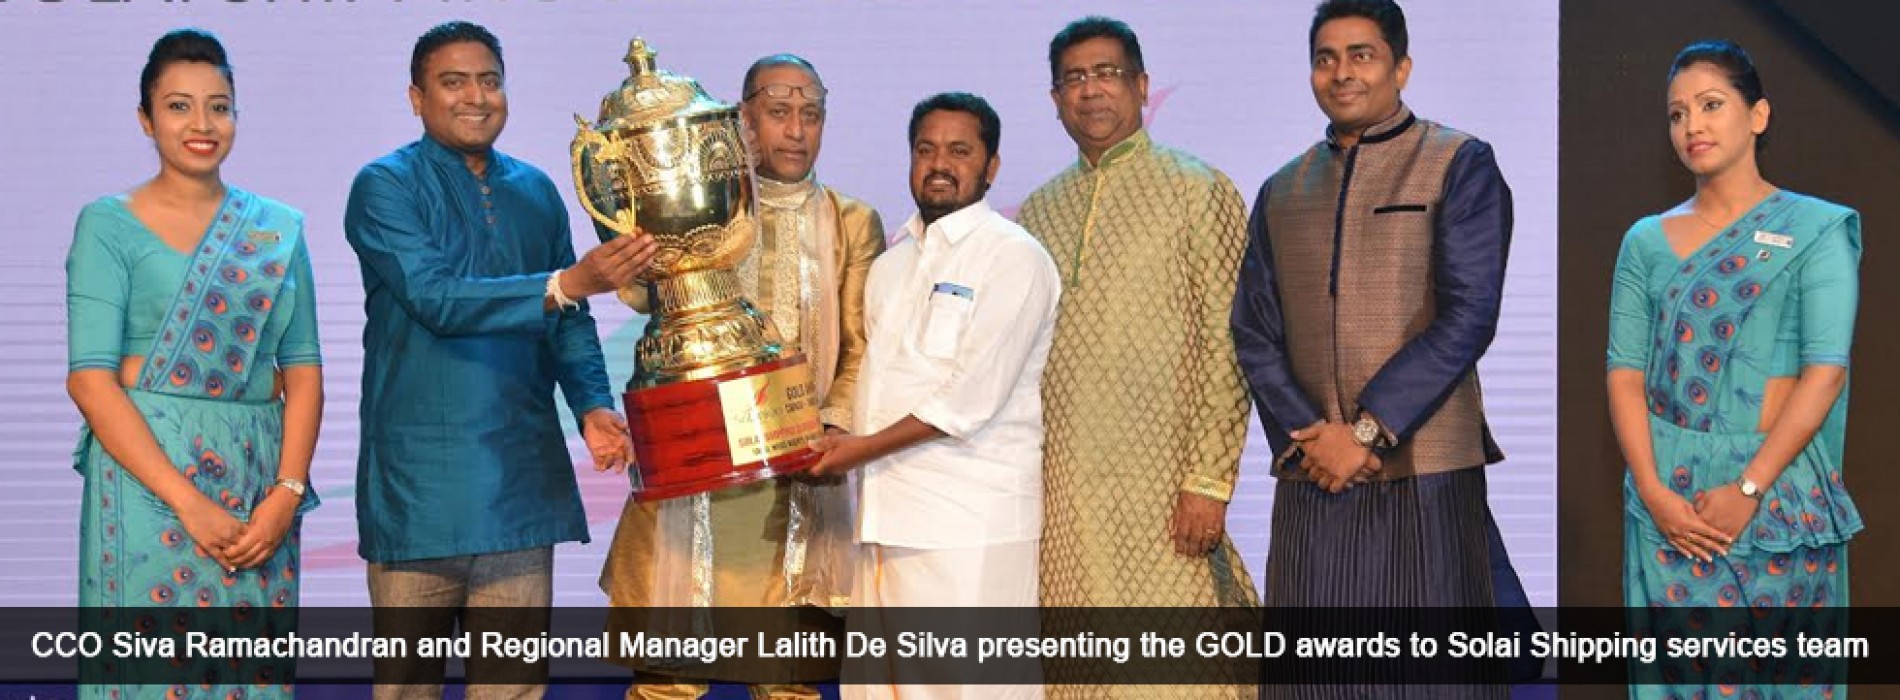 SriLankan Airlines hosted Agents & Cargo Awards Night in Chennai and New Delhi, March 2017